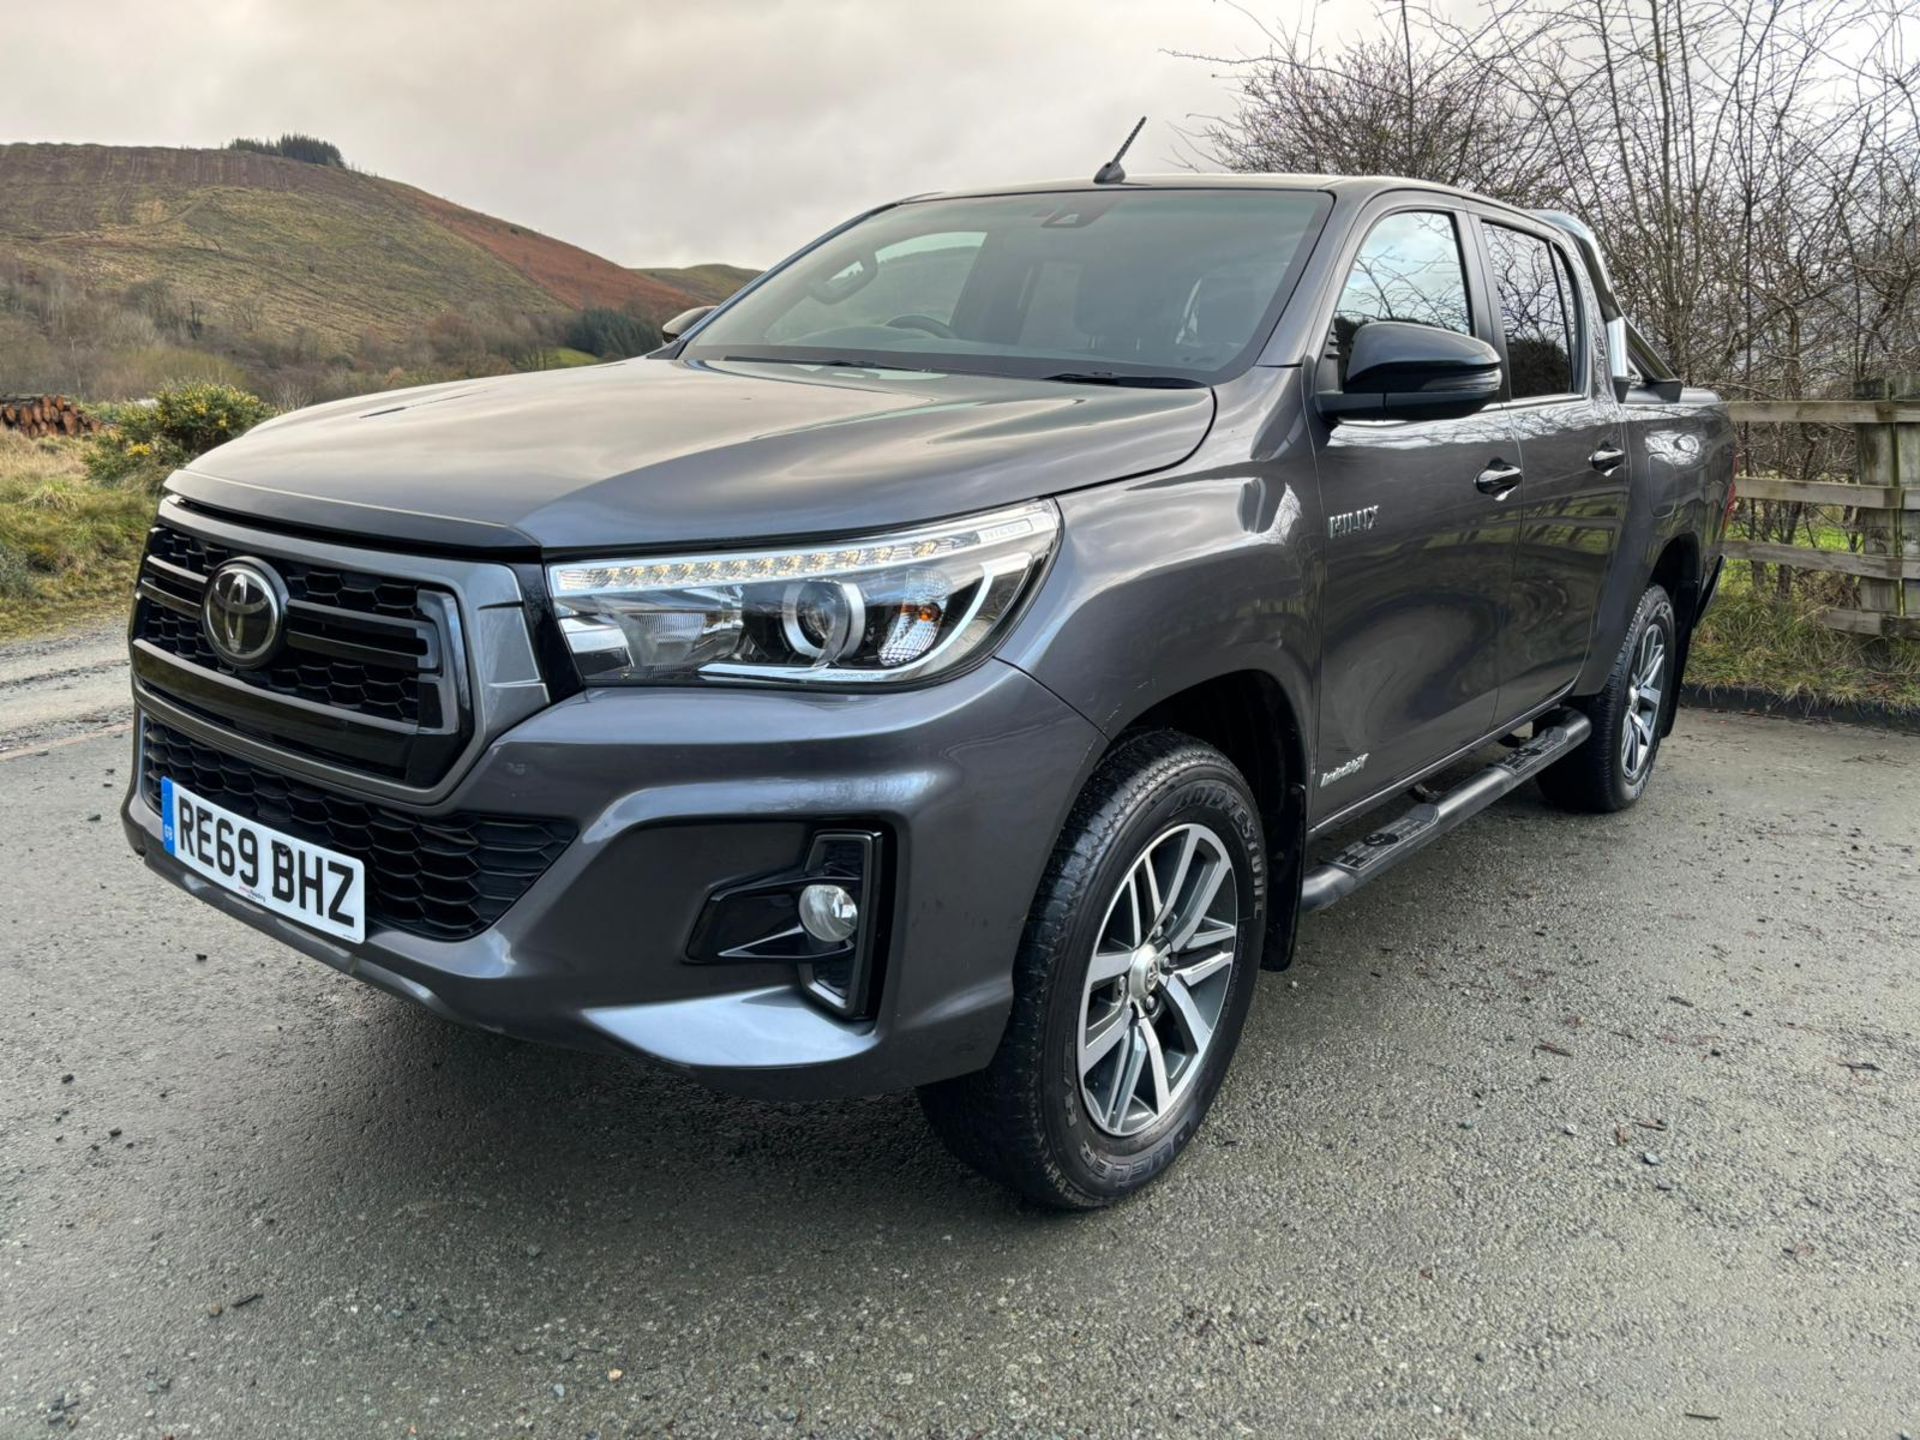 TOYOTA HILUX INVINCIBLE X DOUBLE CAB PICKUP TRUCK 4X4 AUTOMATIC 64K 4WD TWIN CAB - Image 6 of 13